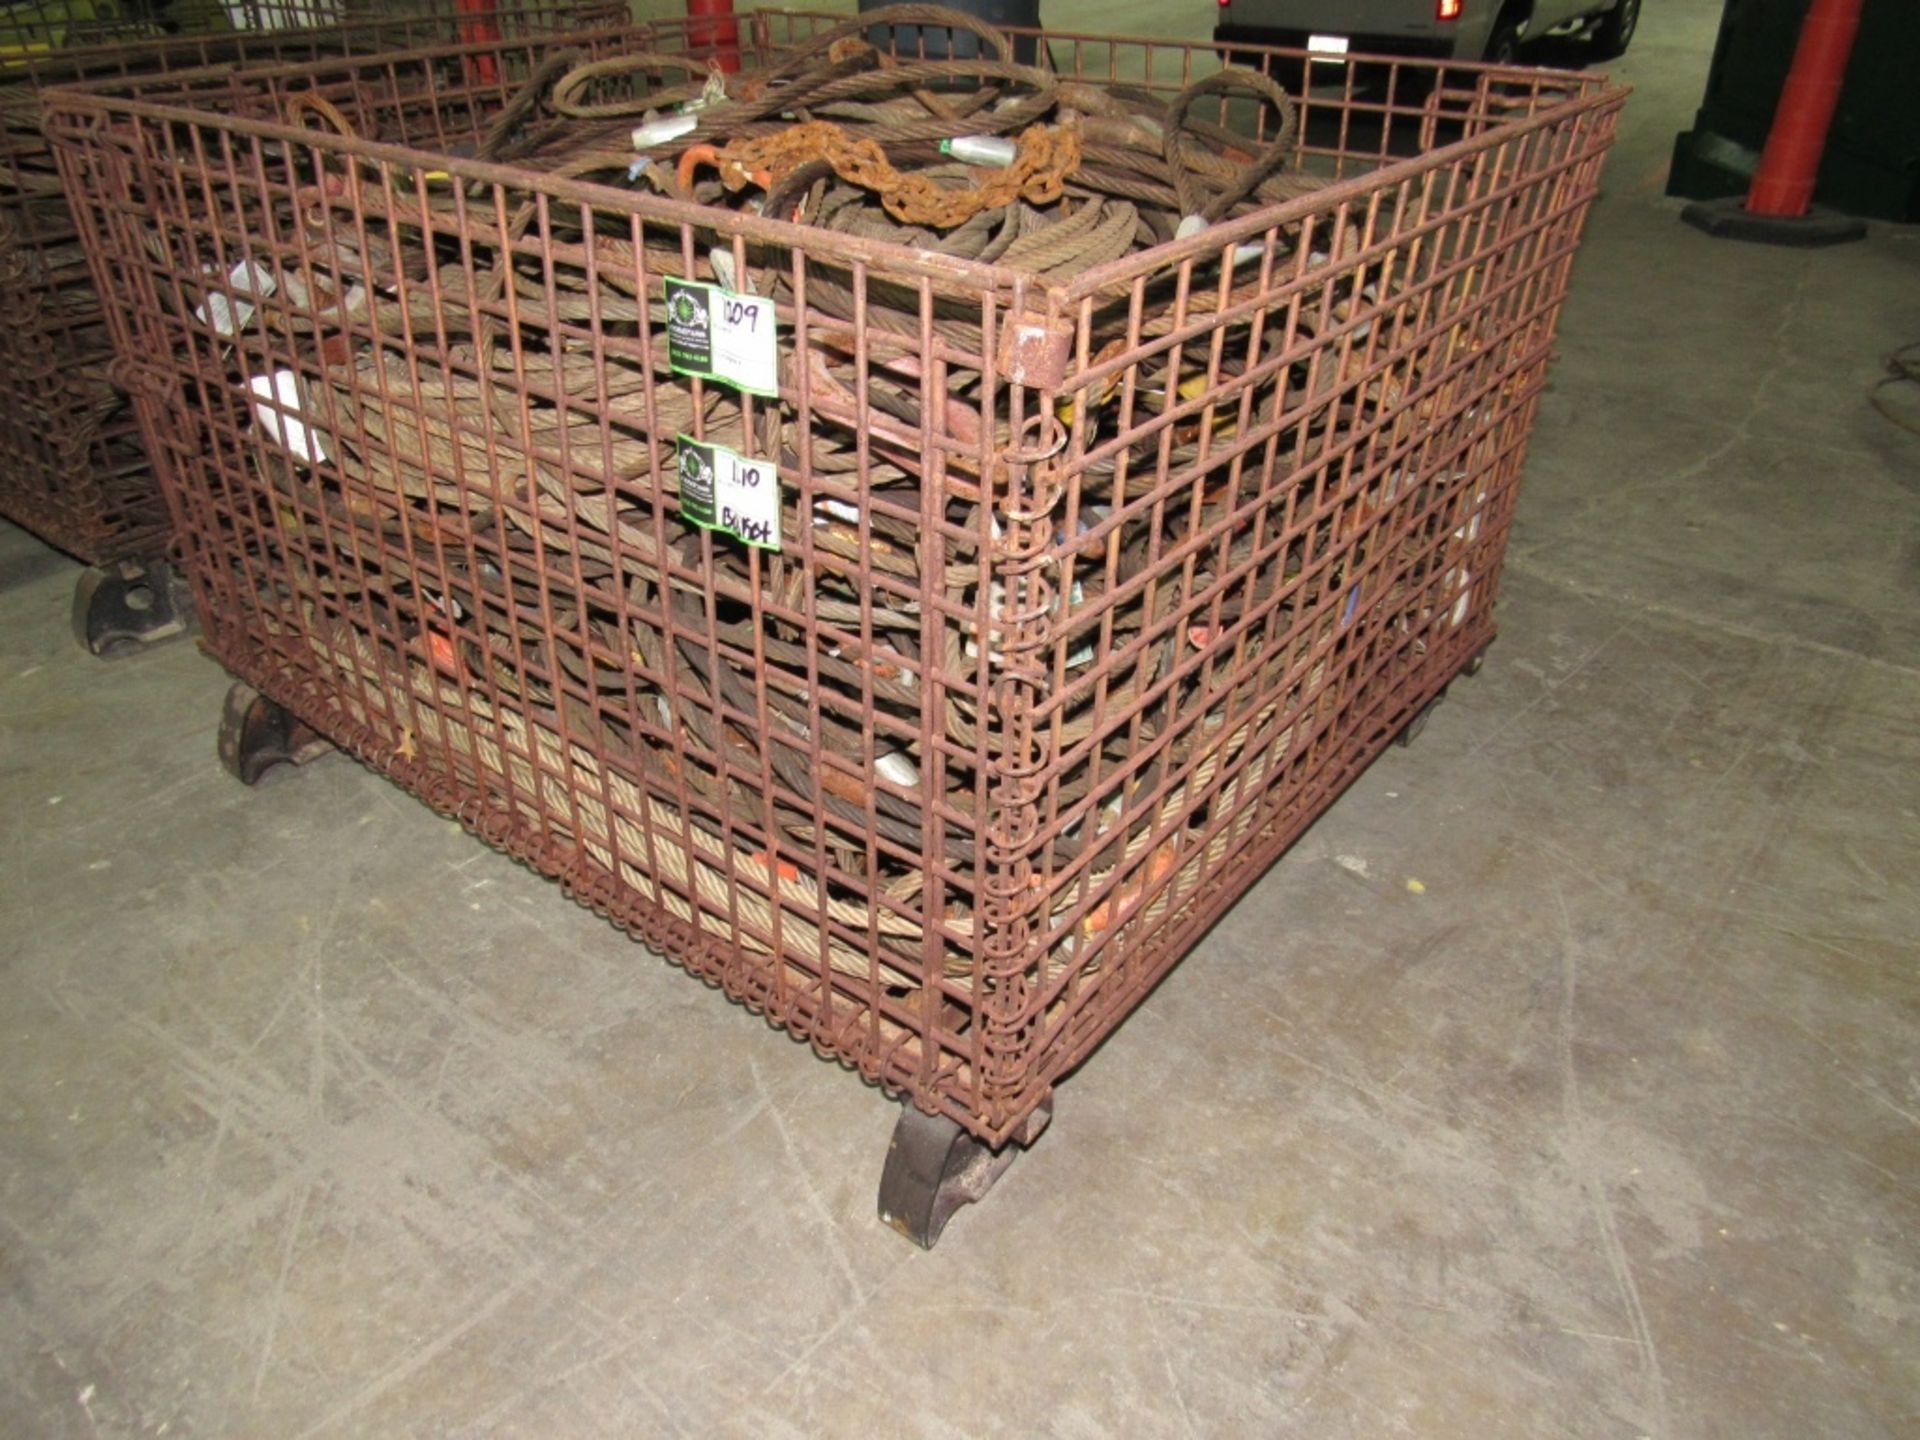 Warehouse Basket- MFR - Unknown 48" x 40" x 31" **Contents SOLD Separately in Lot#1209**